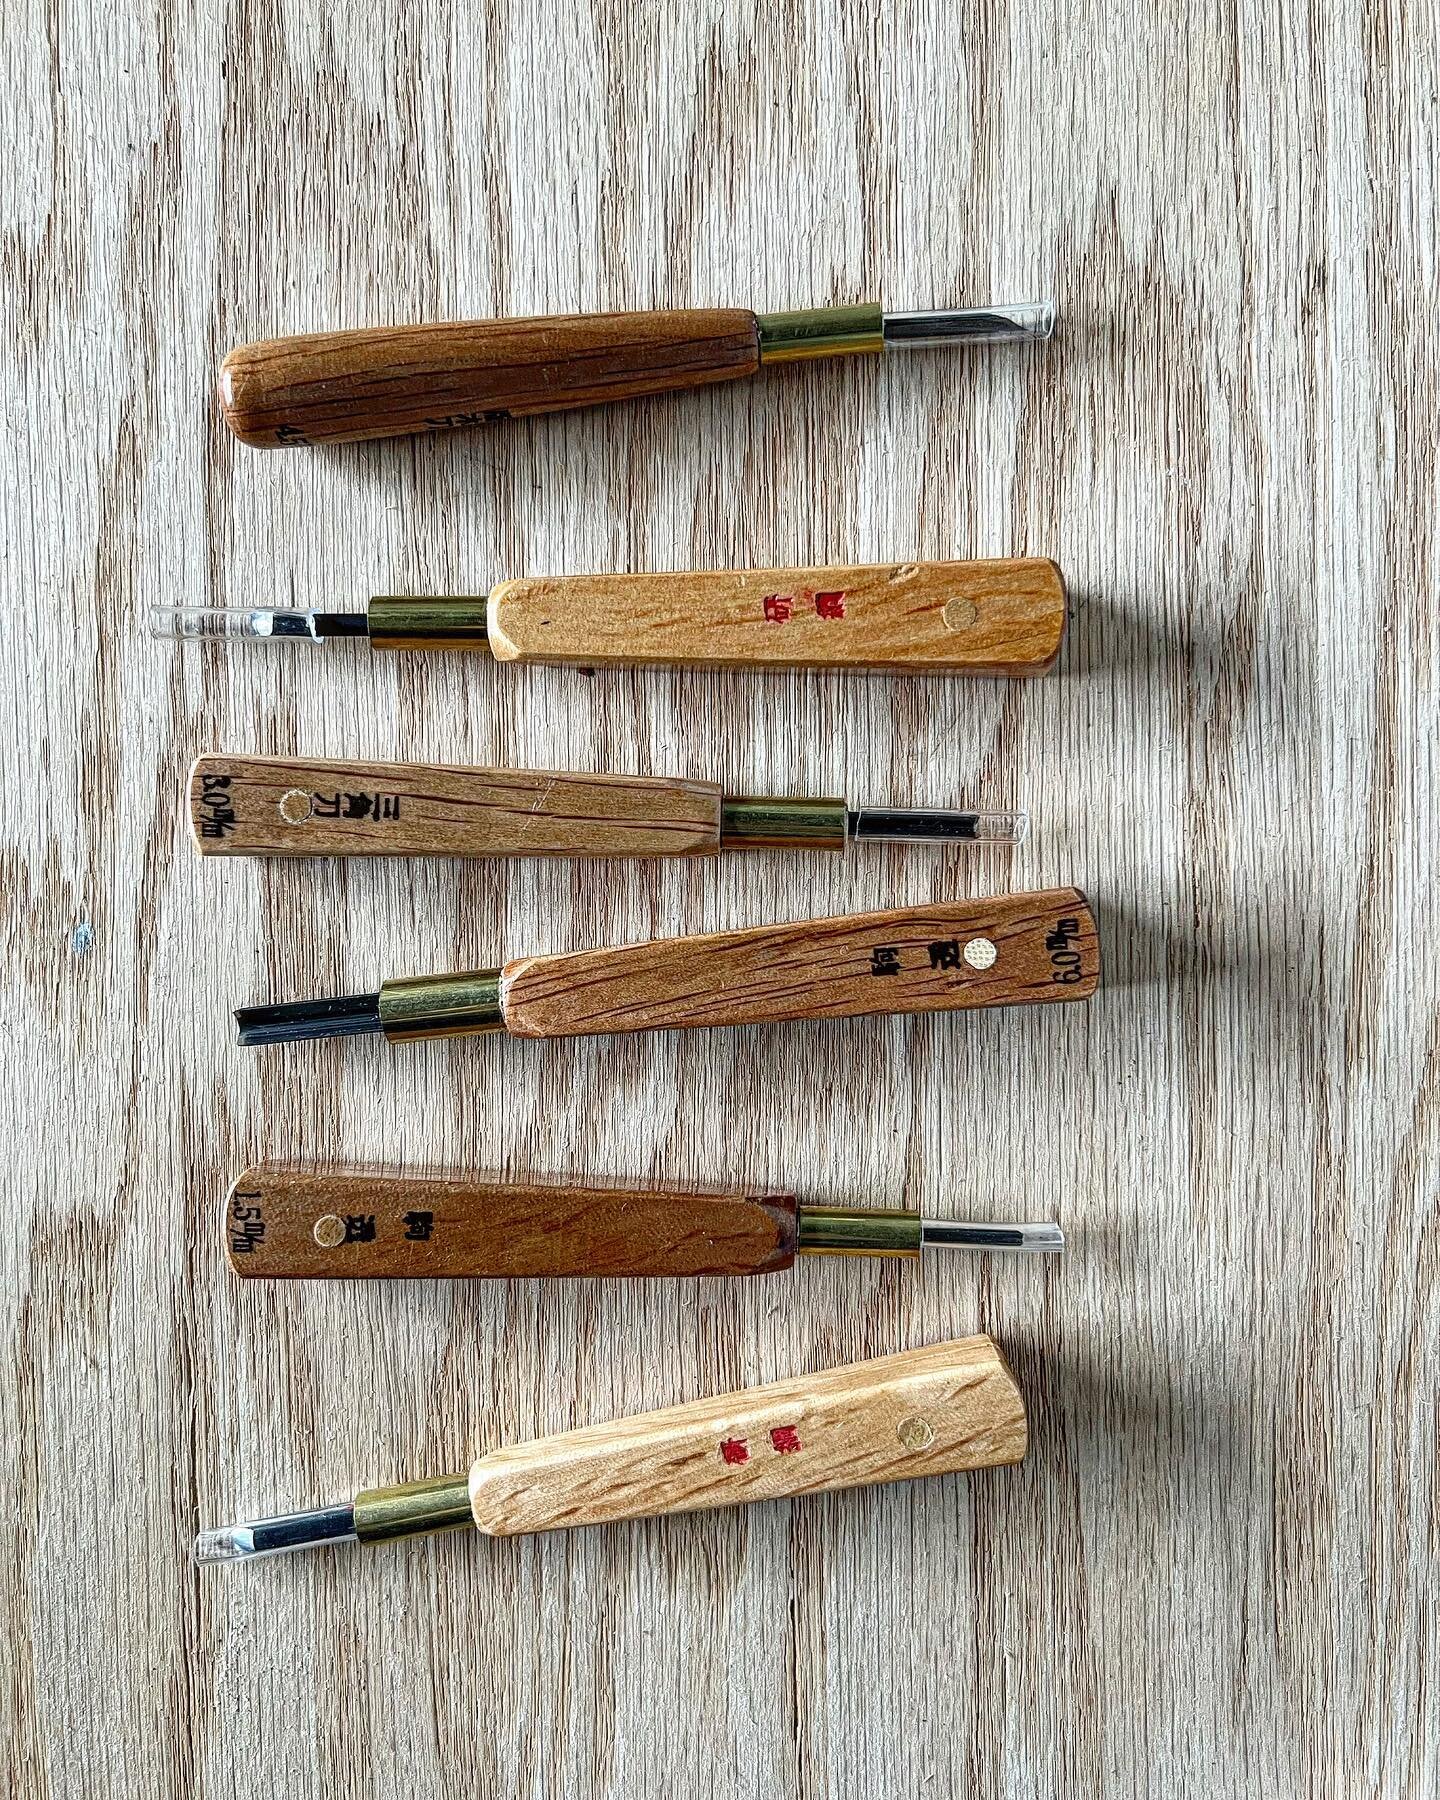 After 15 years with my old student carving tool set, I finally upgraded to these beauties! 😍 Futatsu Wari set from @mcclains.printmaking.supplies &hellip; time to get carving! 

#woodcutprint #woodblockprint #printmaking #woodcut